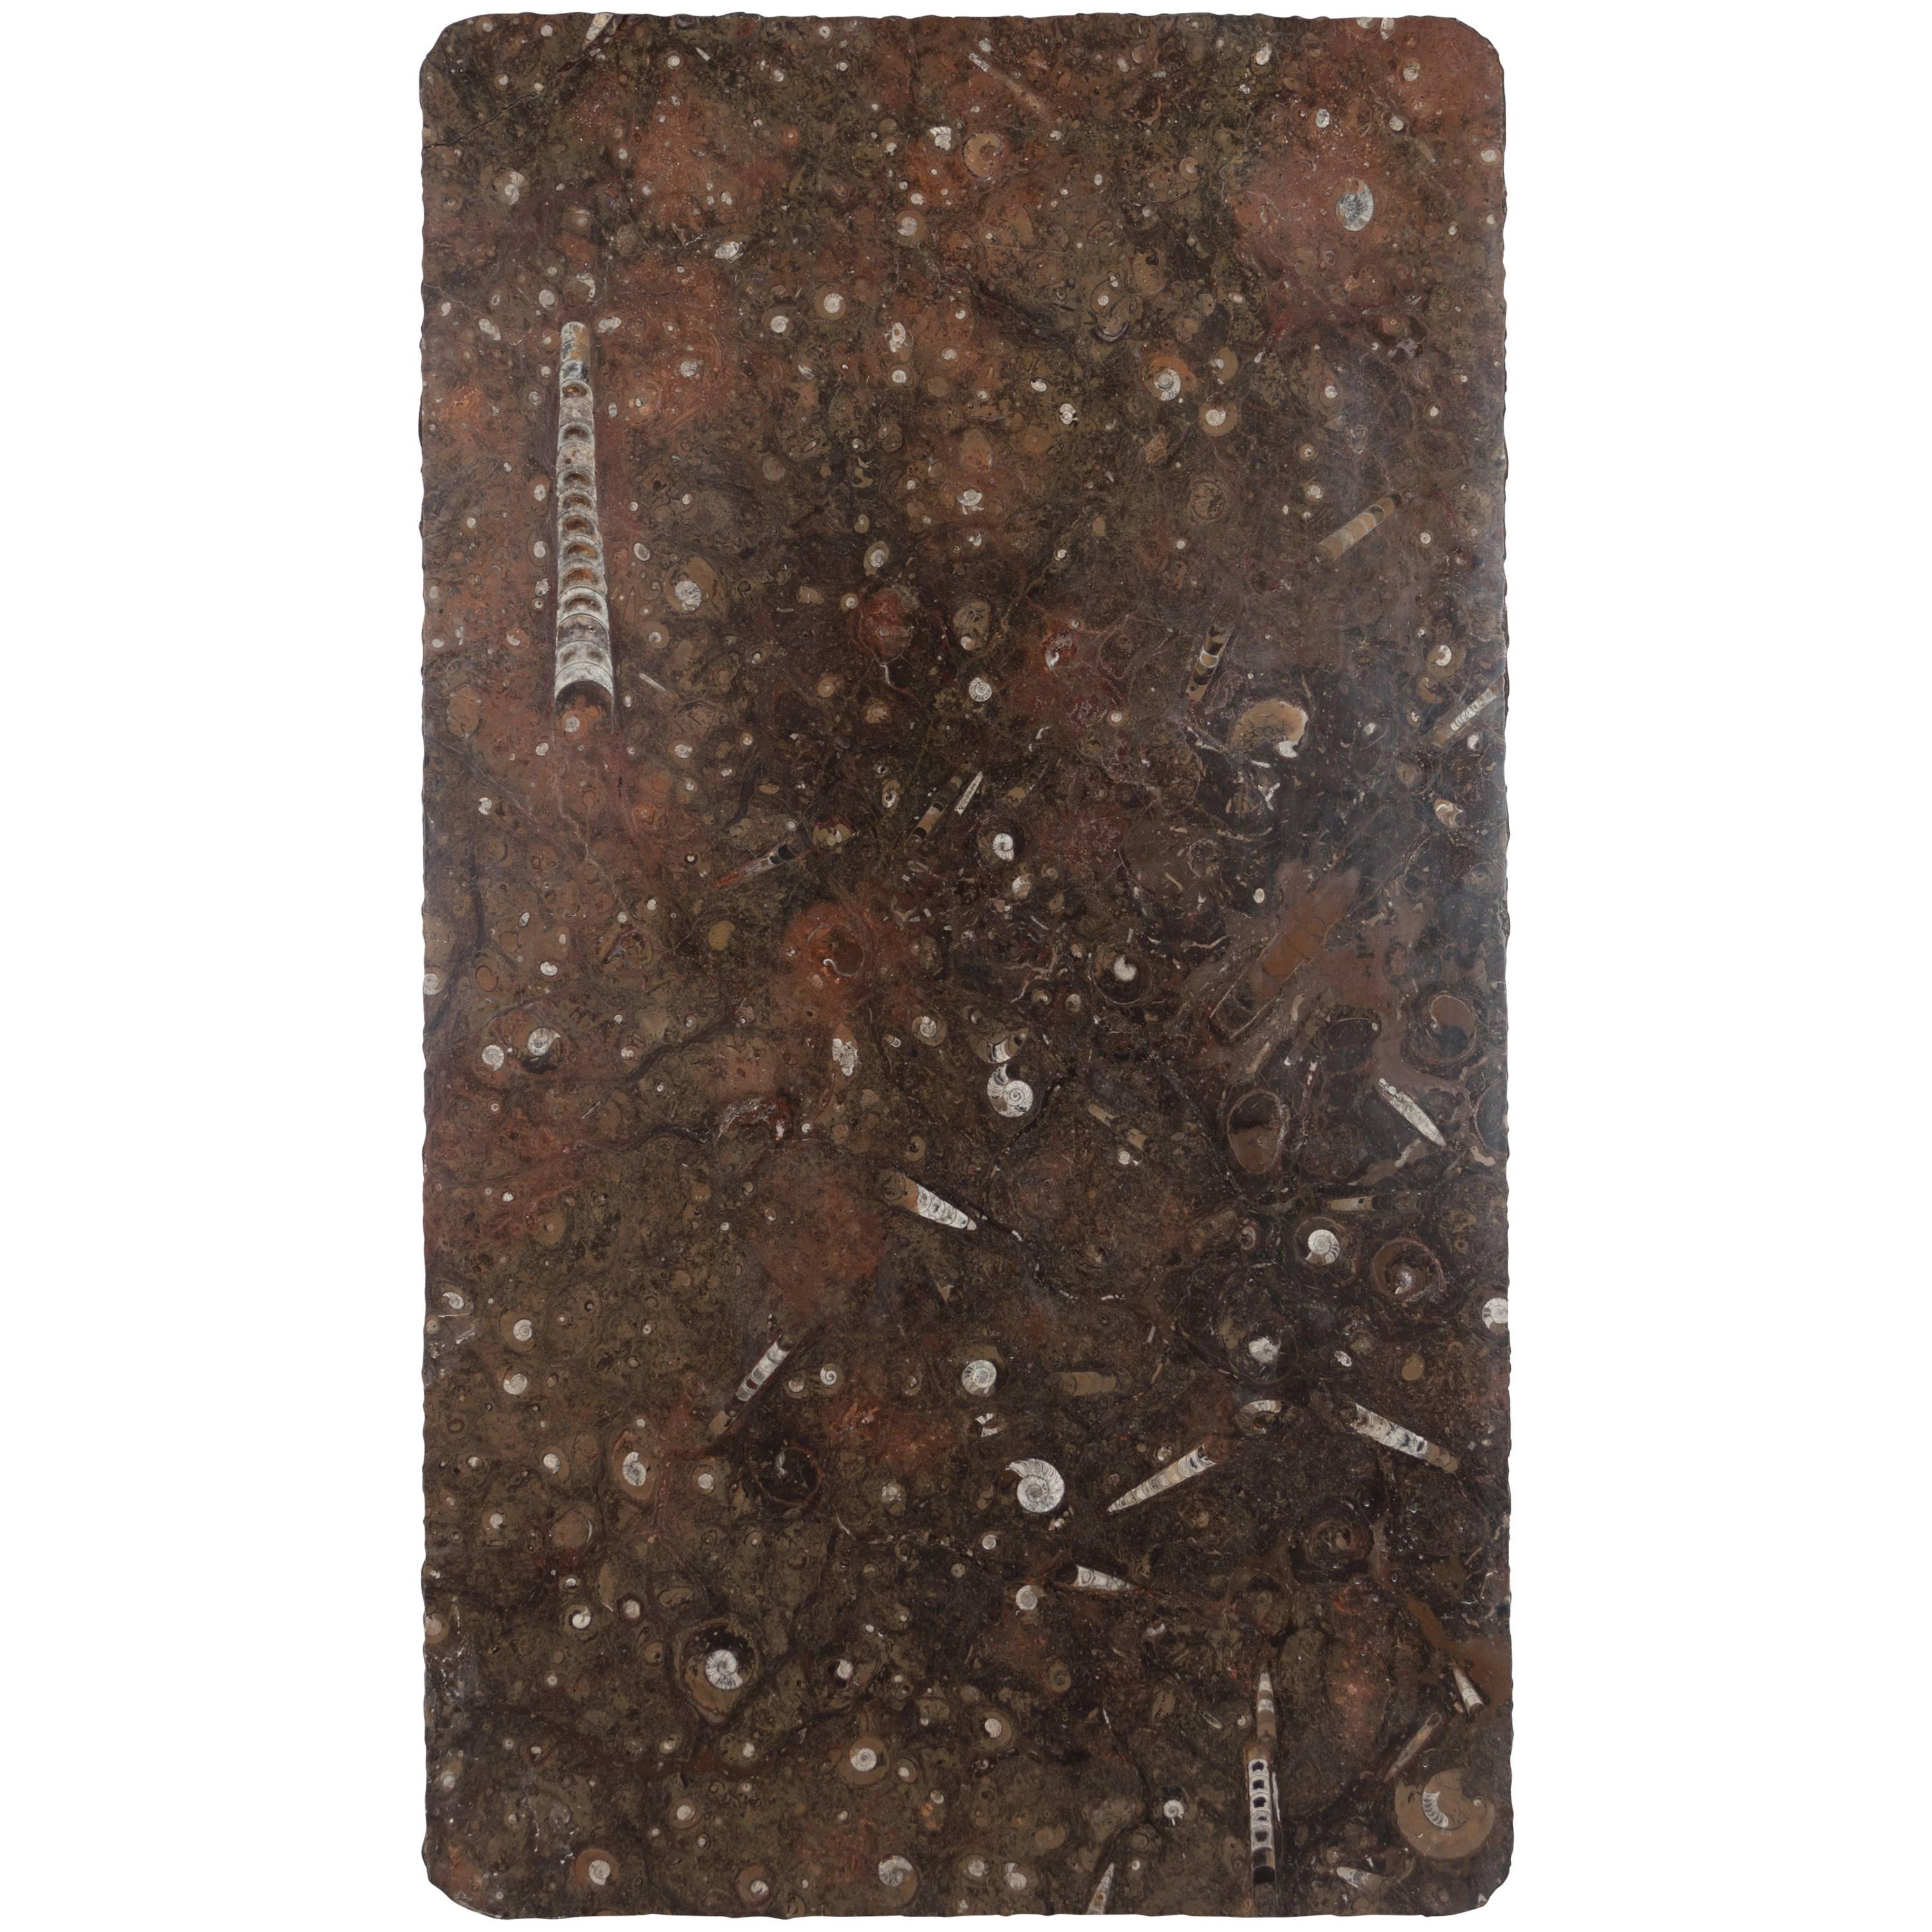 Moroccan Fossil Stone Marble Slab